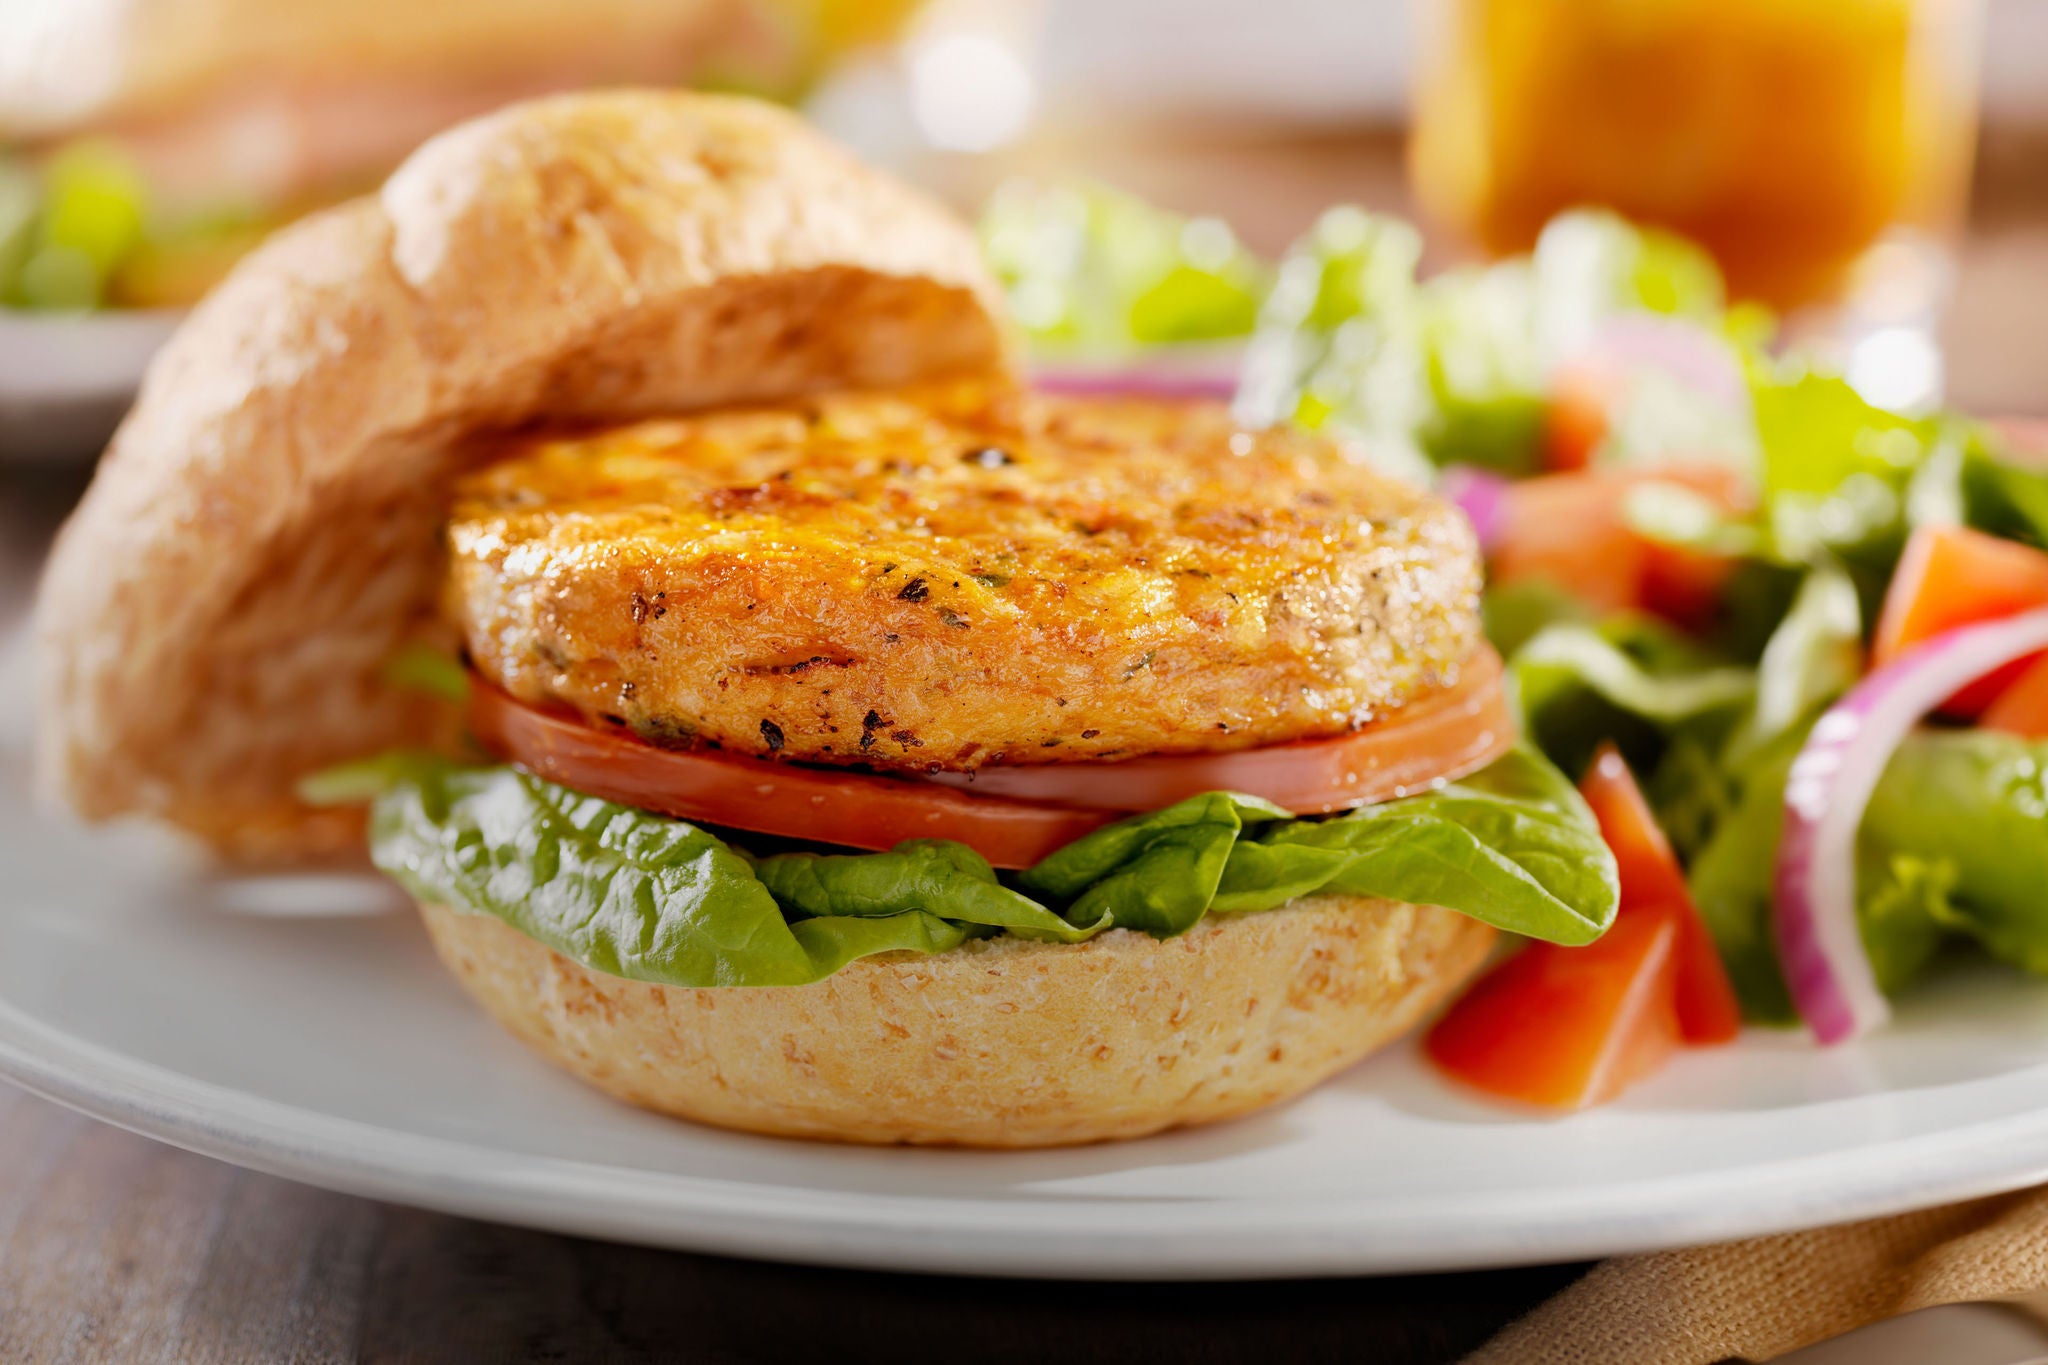 "Vegetarian Soy Burger with Spinach, Tomatoes and a Side Salad -Photographed on Hasselblad H3D-39mb Camera"